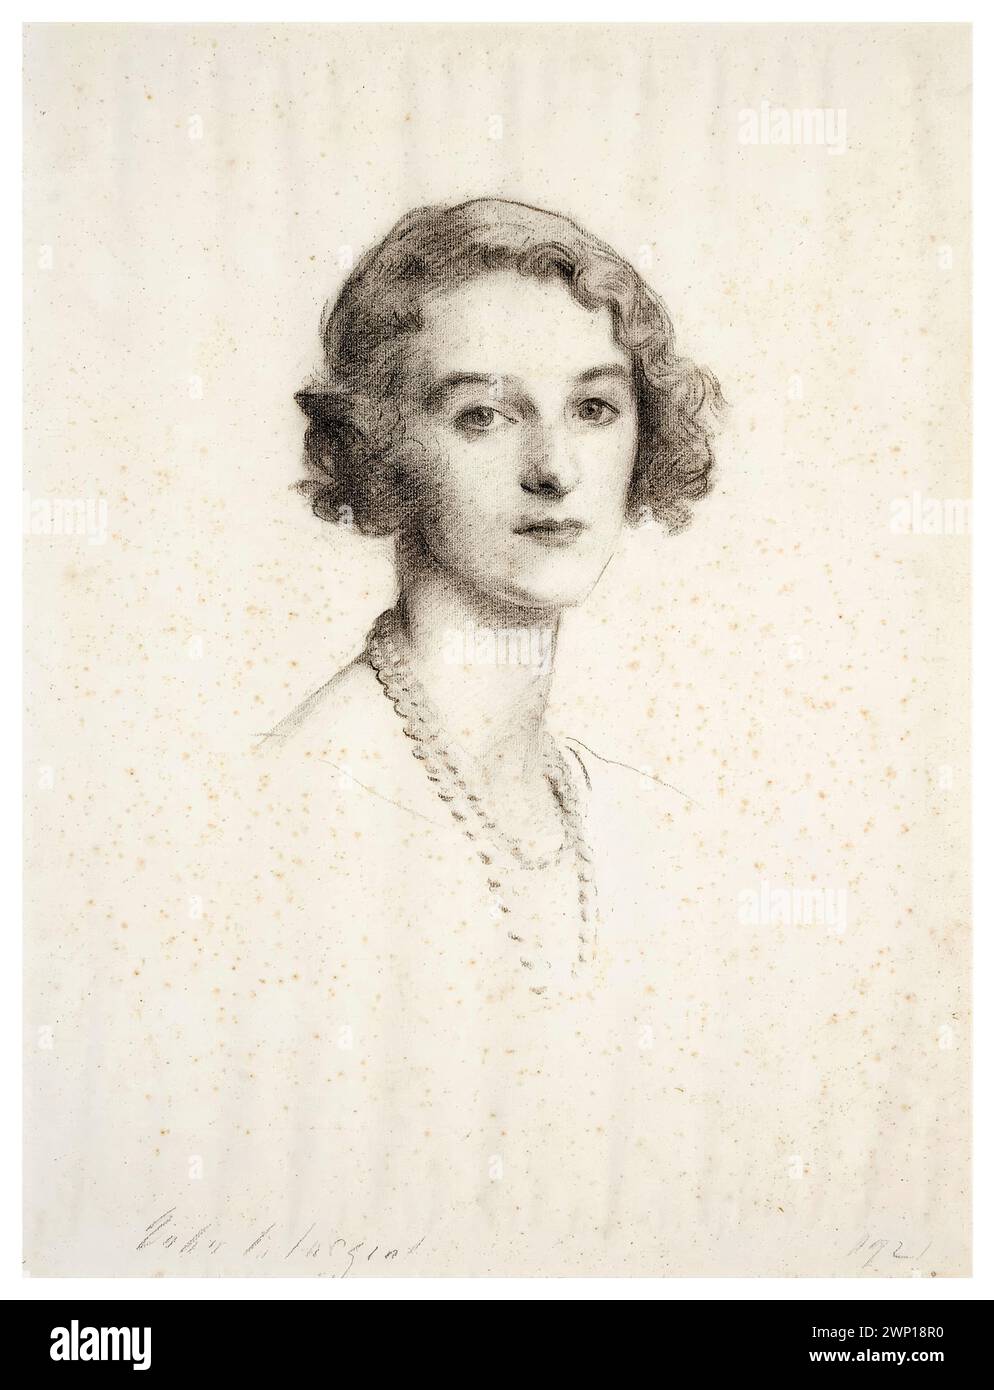 Freda Dudley Ward, Winifred May Mones, Marquesa de Casa Maury, (née Birkin, 1894-1983) English socialite, mistress of Edward, Prince of Wales (later King Edward VIII), portrait drawing in charcoal by John Singer Sargent, 1921 Stock Photo